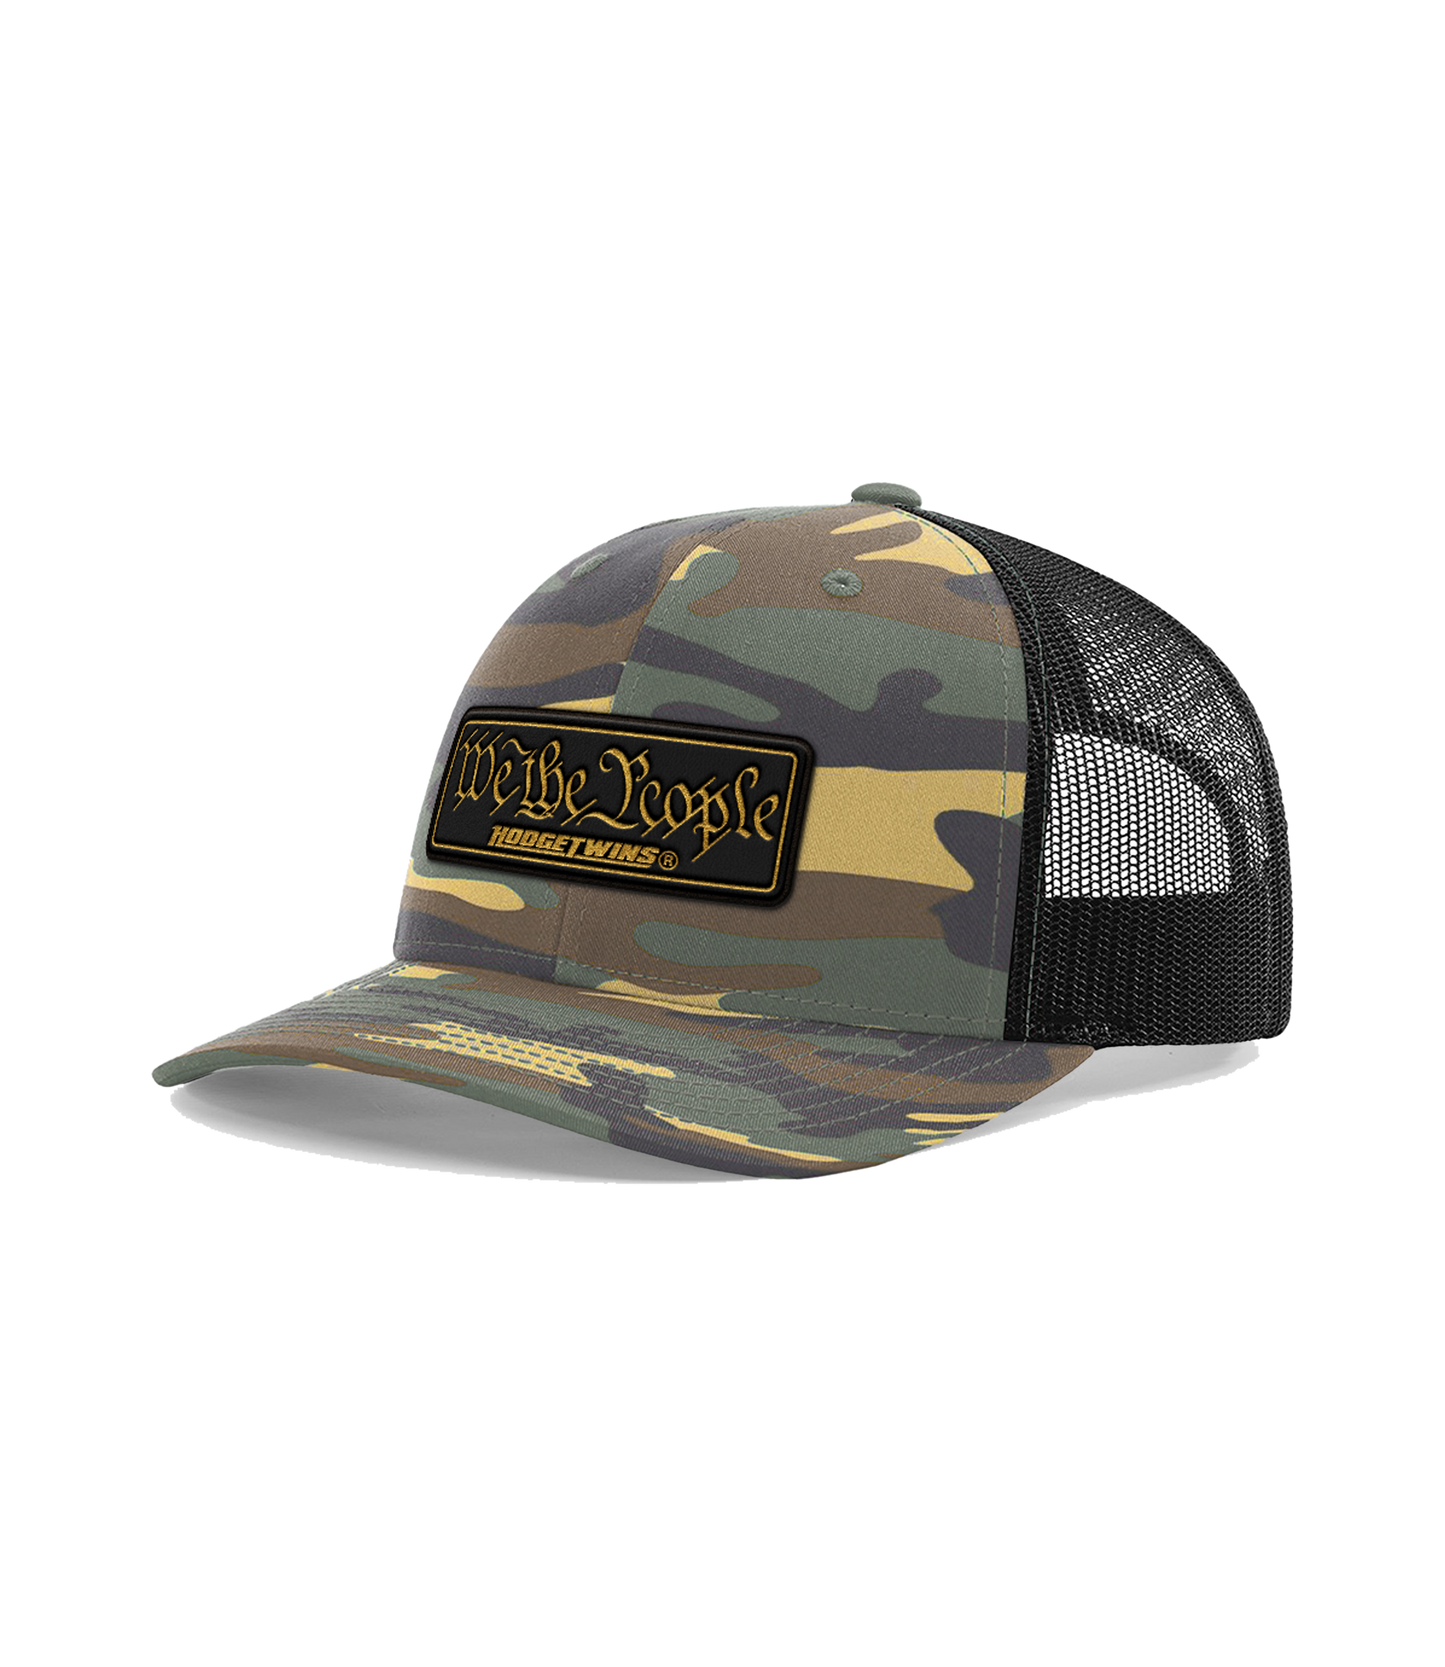 Camo front black mesh OSFA mesh hat with a black and gold leather patch that reads We The People